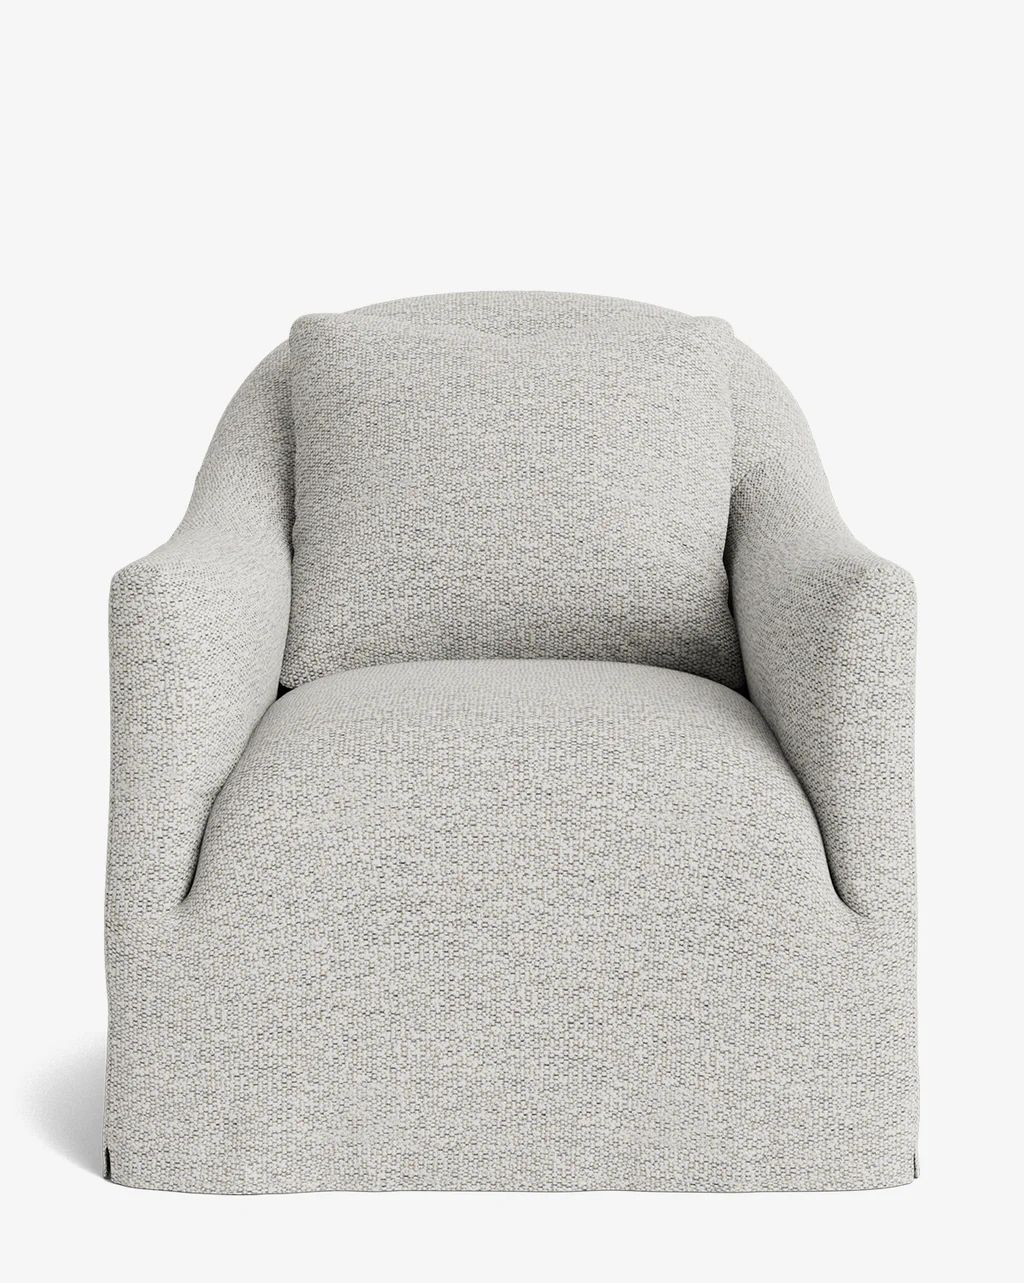 Trudeaux Slipcover Swivel Chair | McGee & Co.